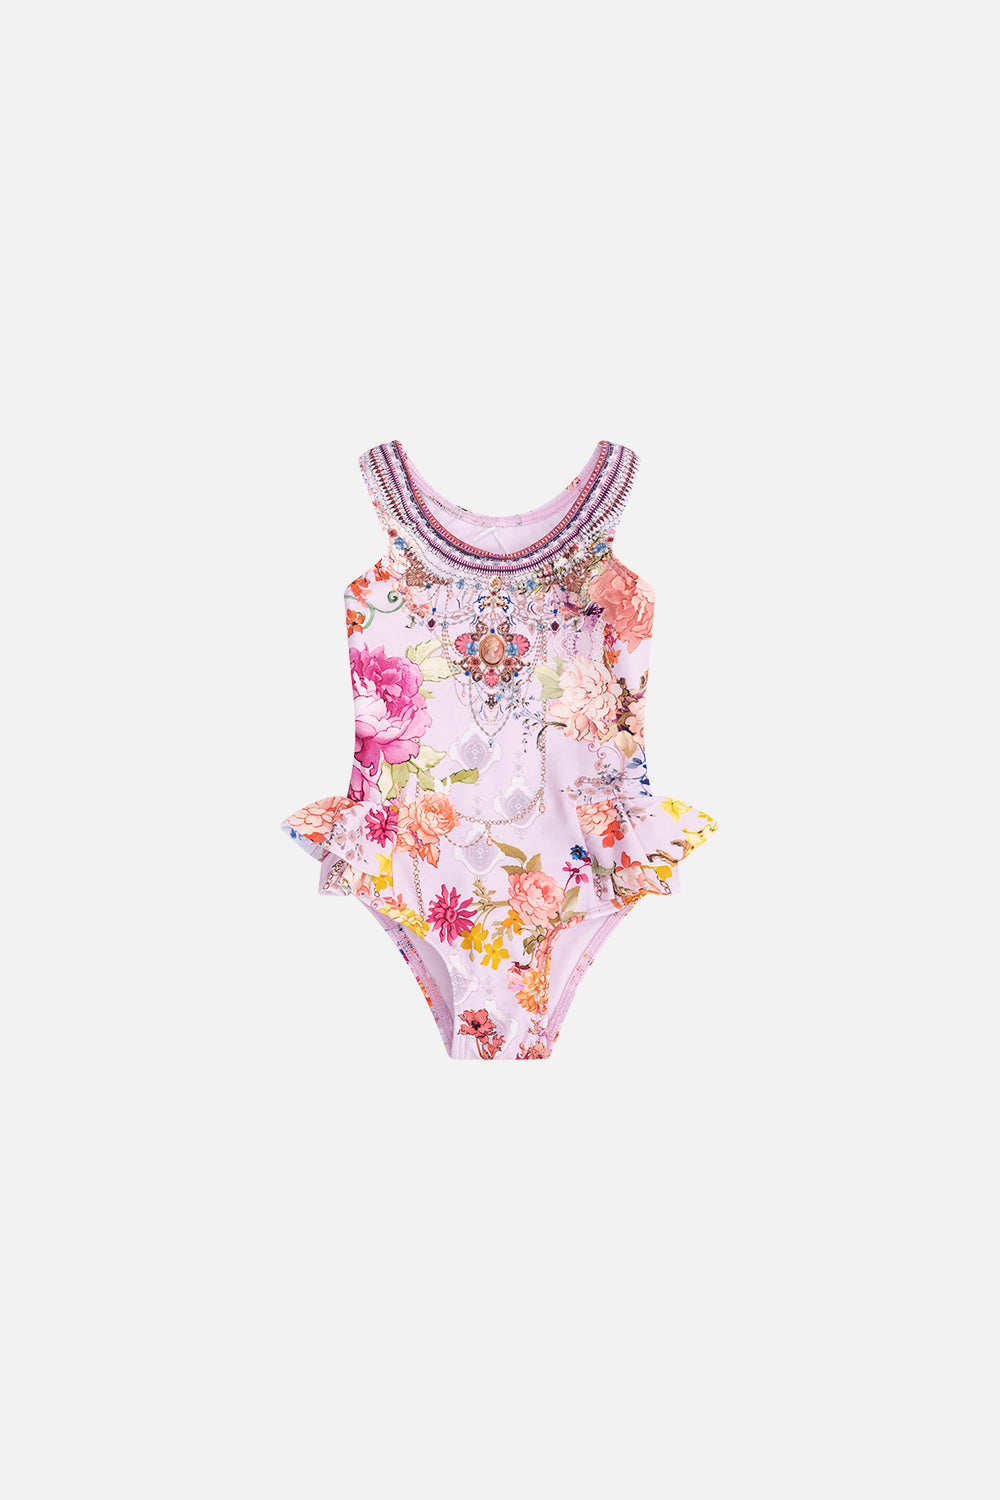 BABIES RUFFLE BACK ONE PIECE ST GERMAINS GIRL